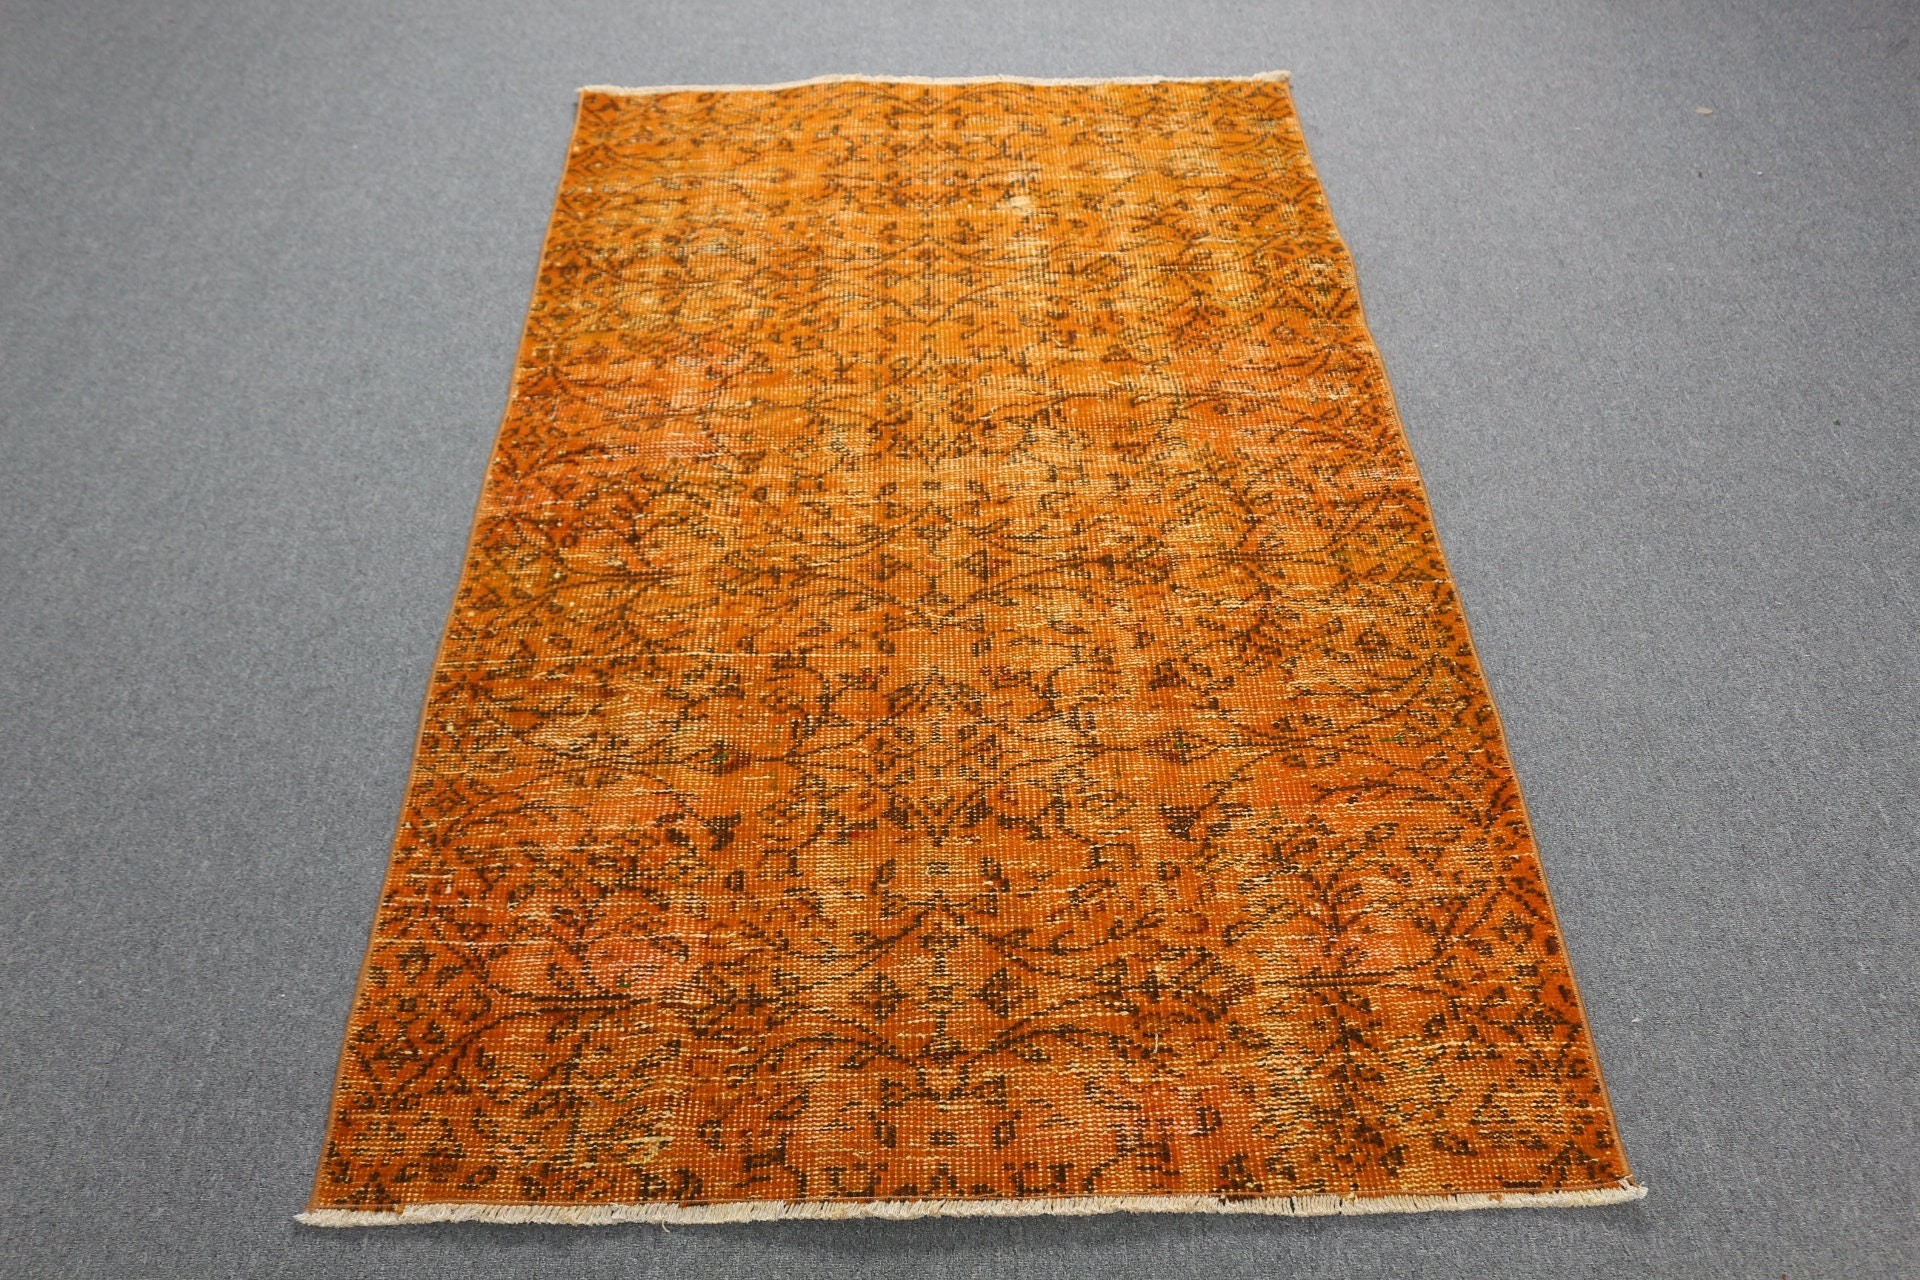 3.5x6.3 ft Accent Rug, Art Rug, Vintage Rug, Orange Home Decor Rugs, Turkish Rugs, Moroccan Rugs, Entry Rugs, Oushak Rug, Kitchen Rug